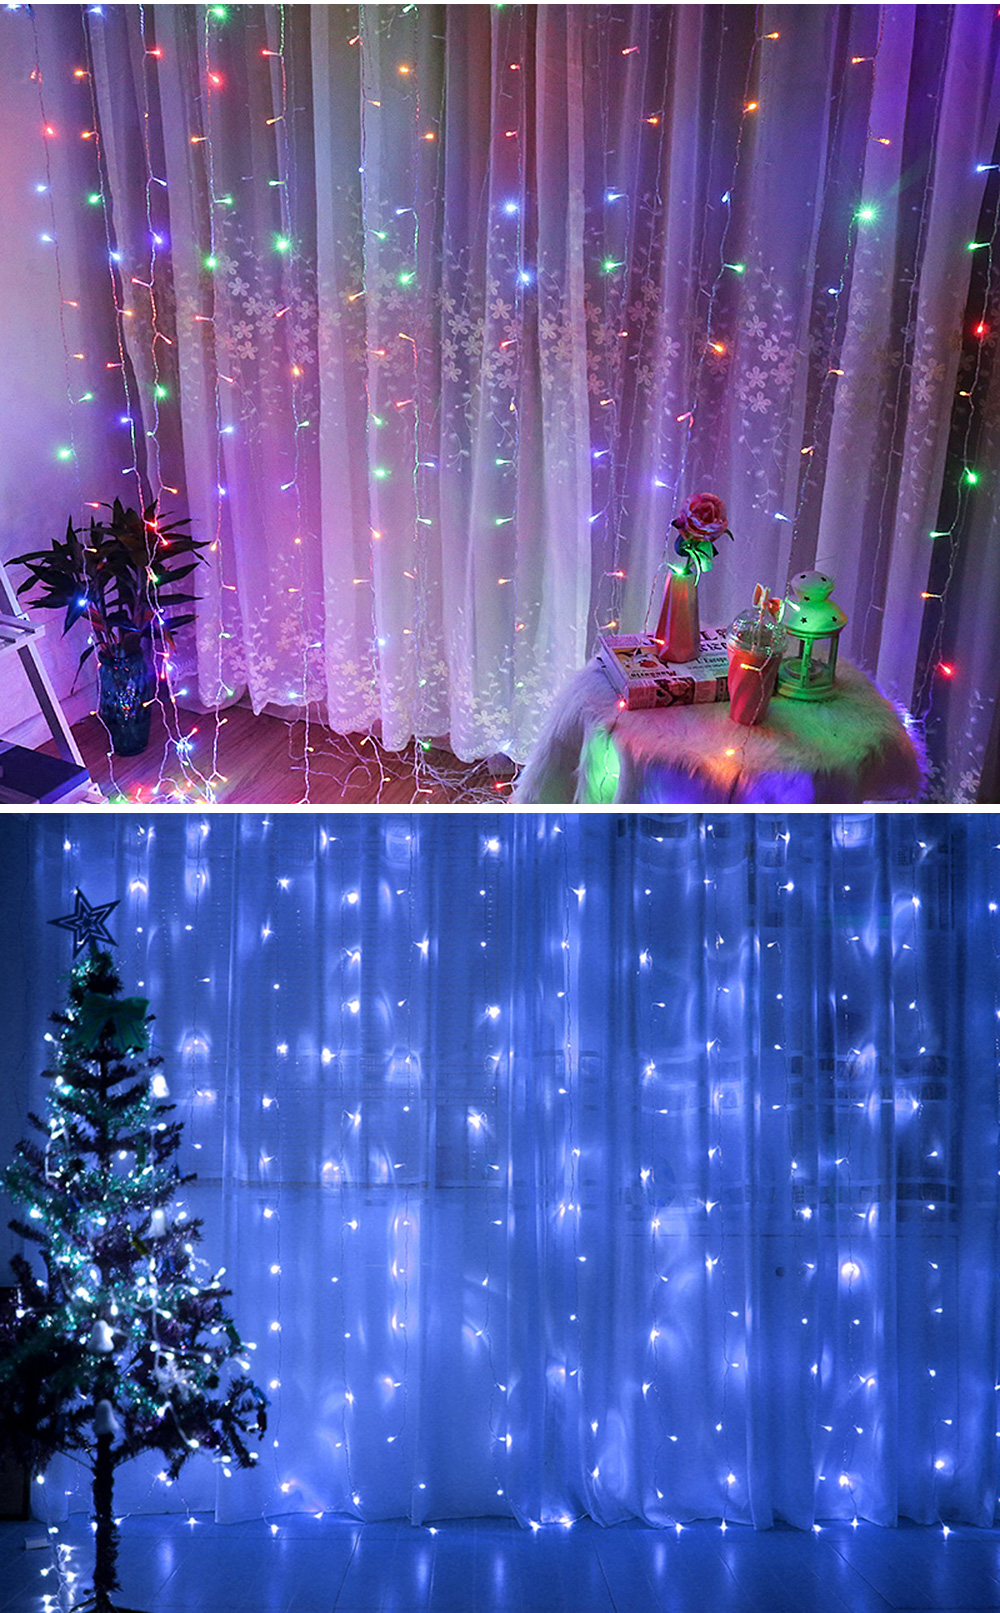 1PC Waterproof Outdoor Home 10M LED Fairy String Lights Christmas Party Wedding Holiday Decoration